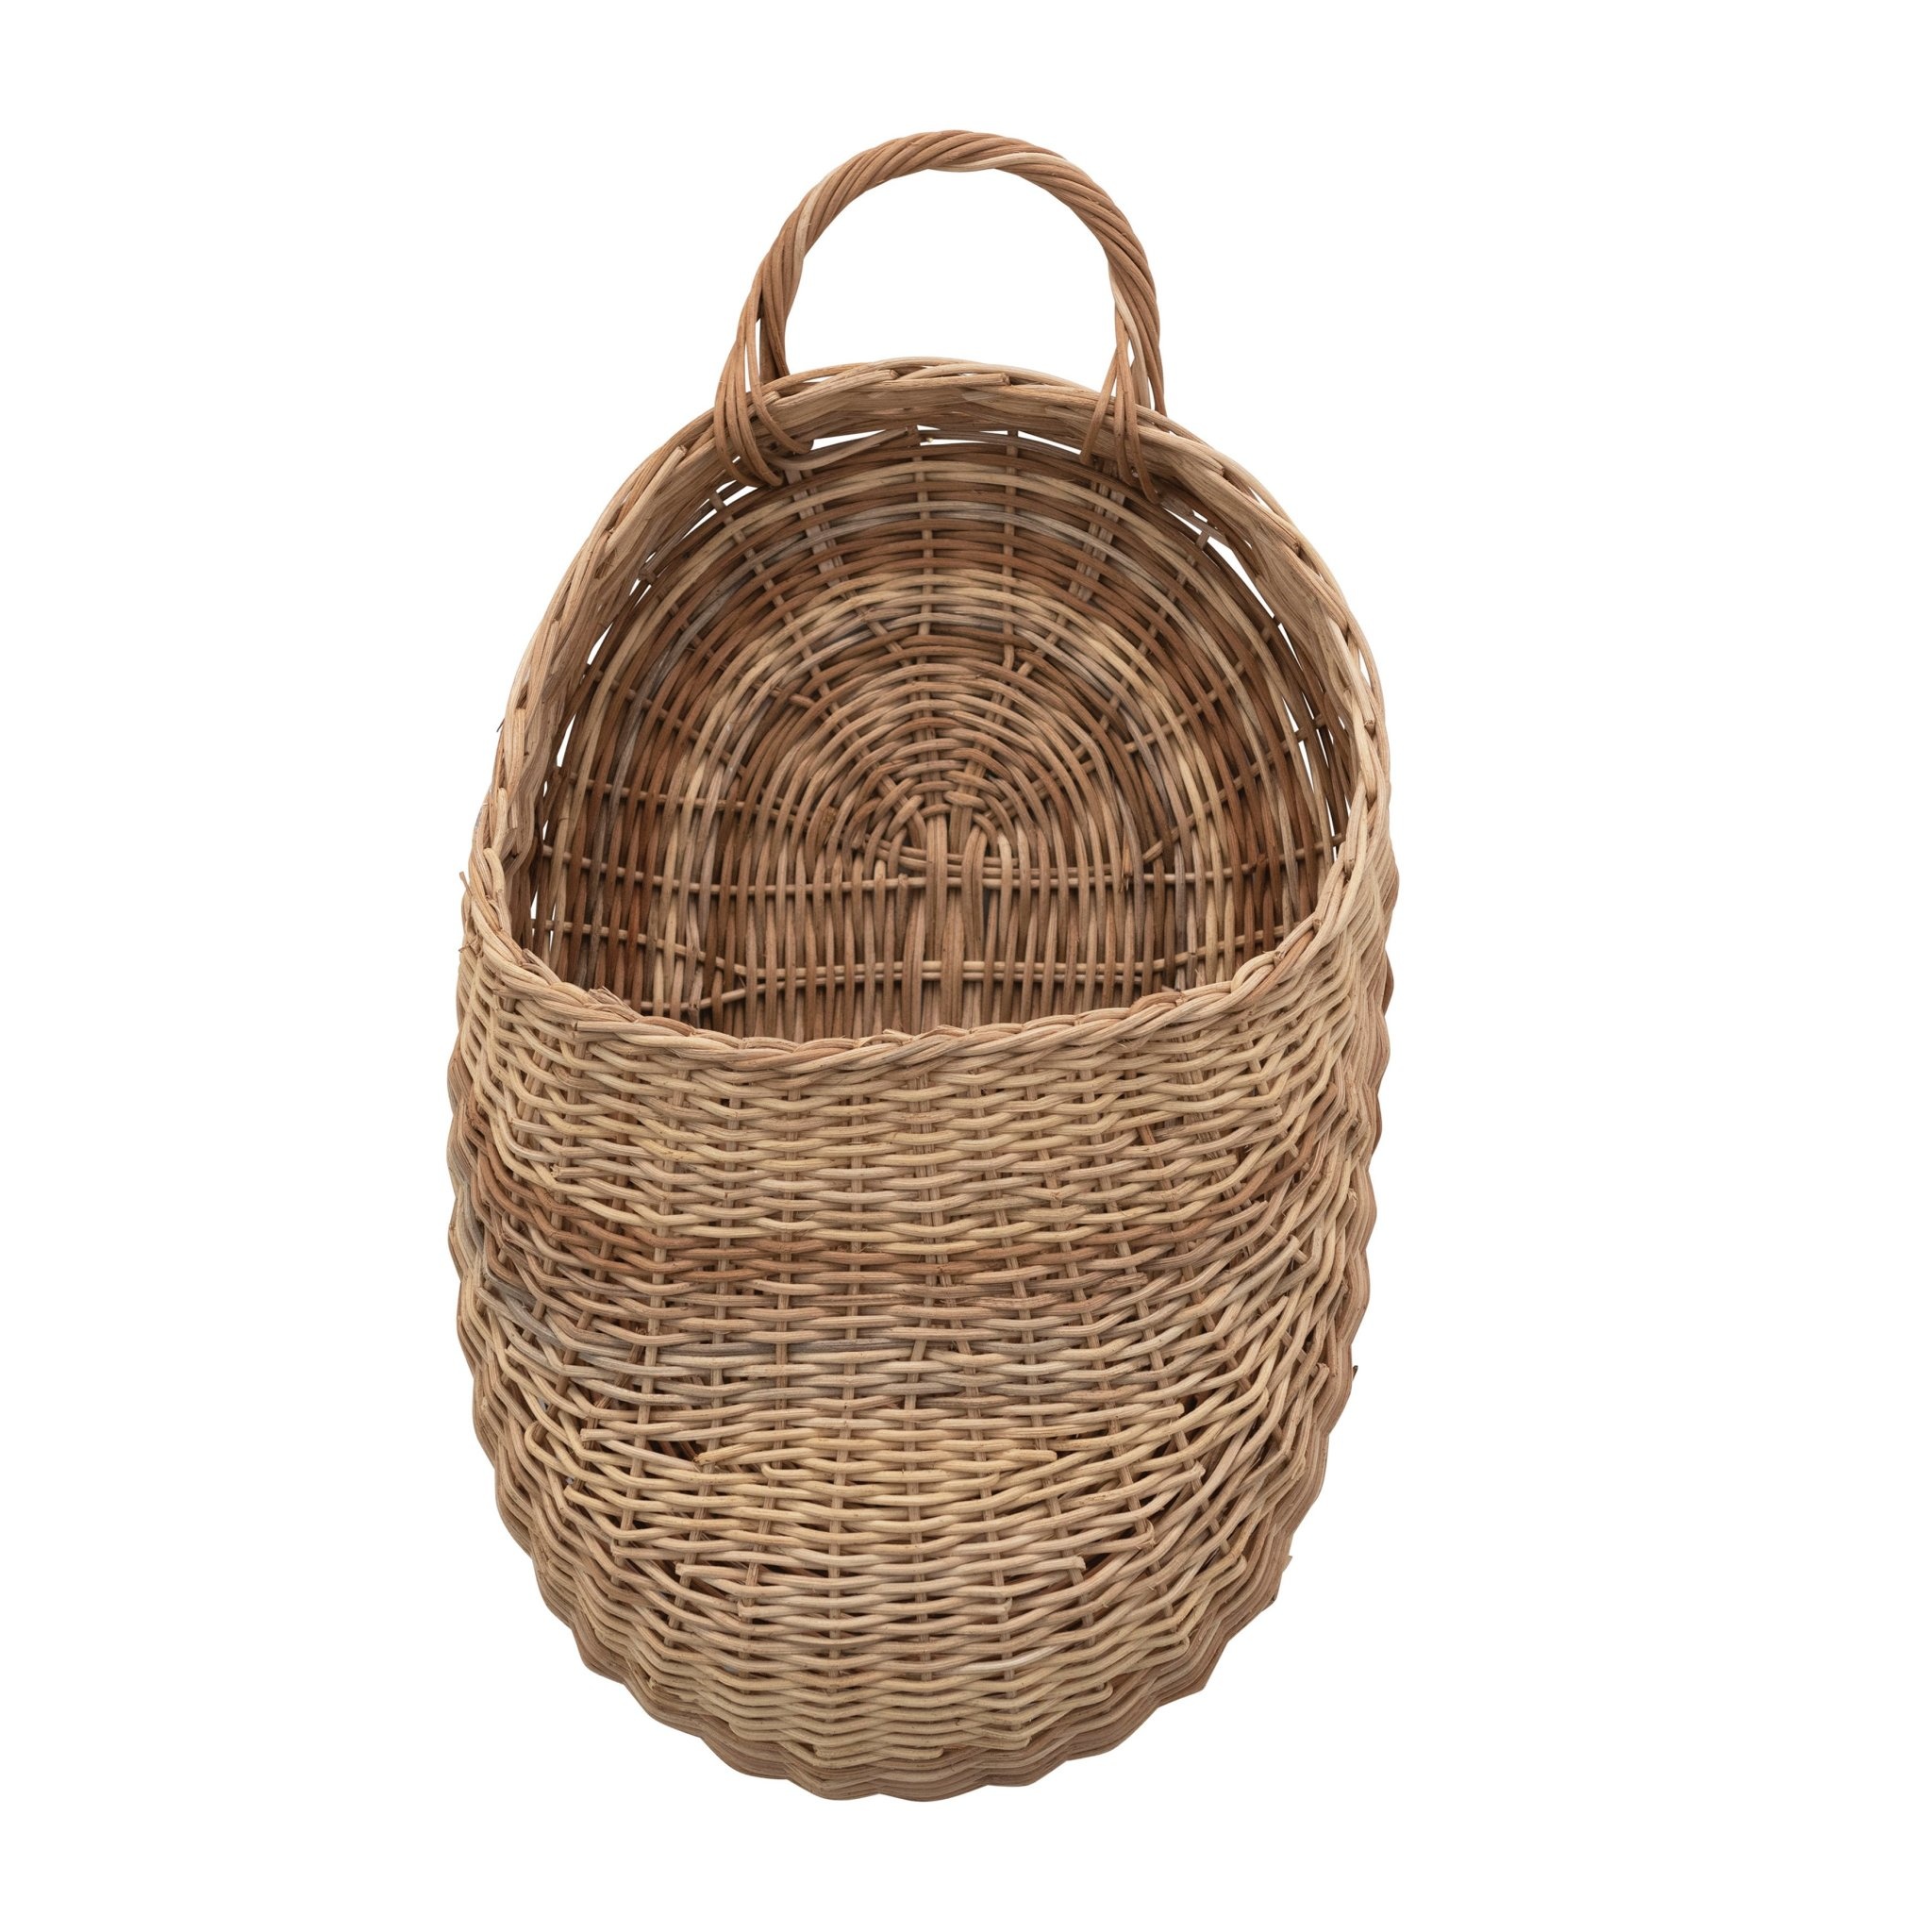 Hand-Woven Wicker Wall Basket w/ Handle, Natural - Knotty and